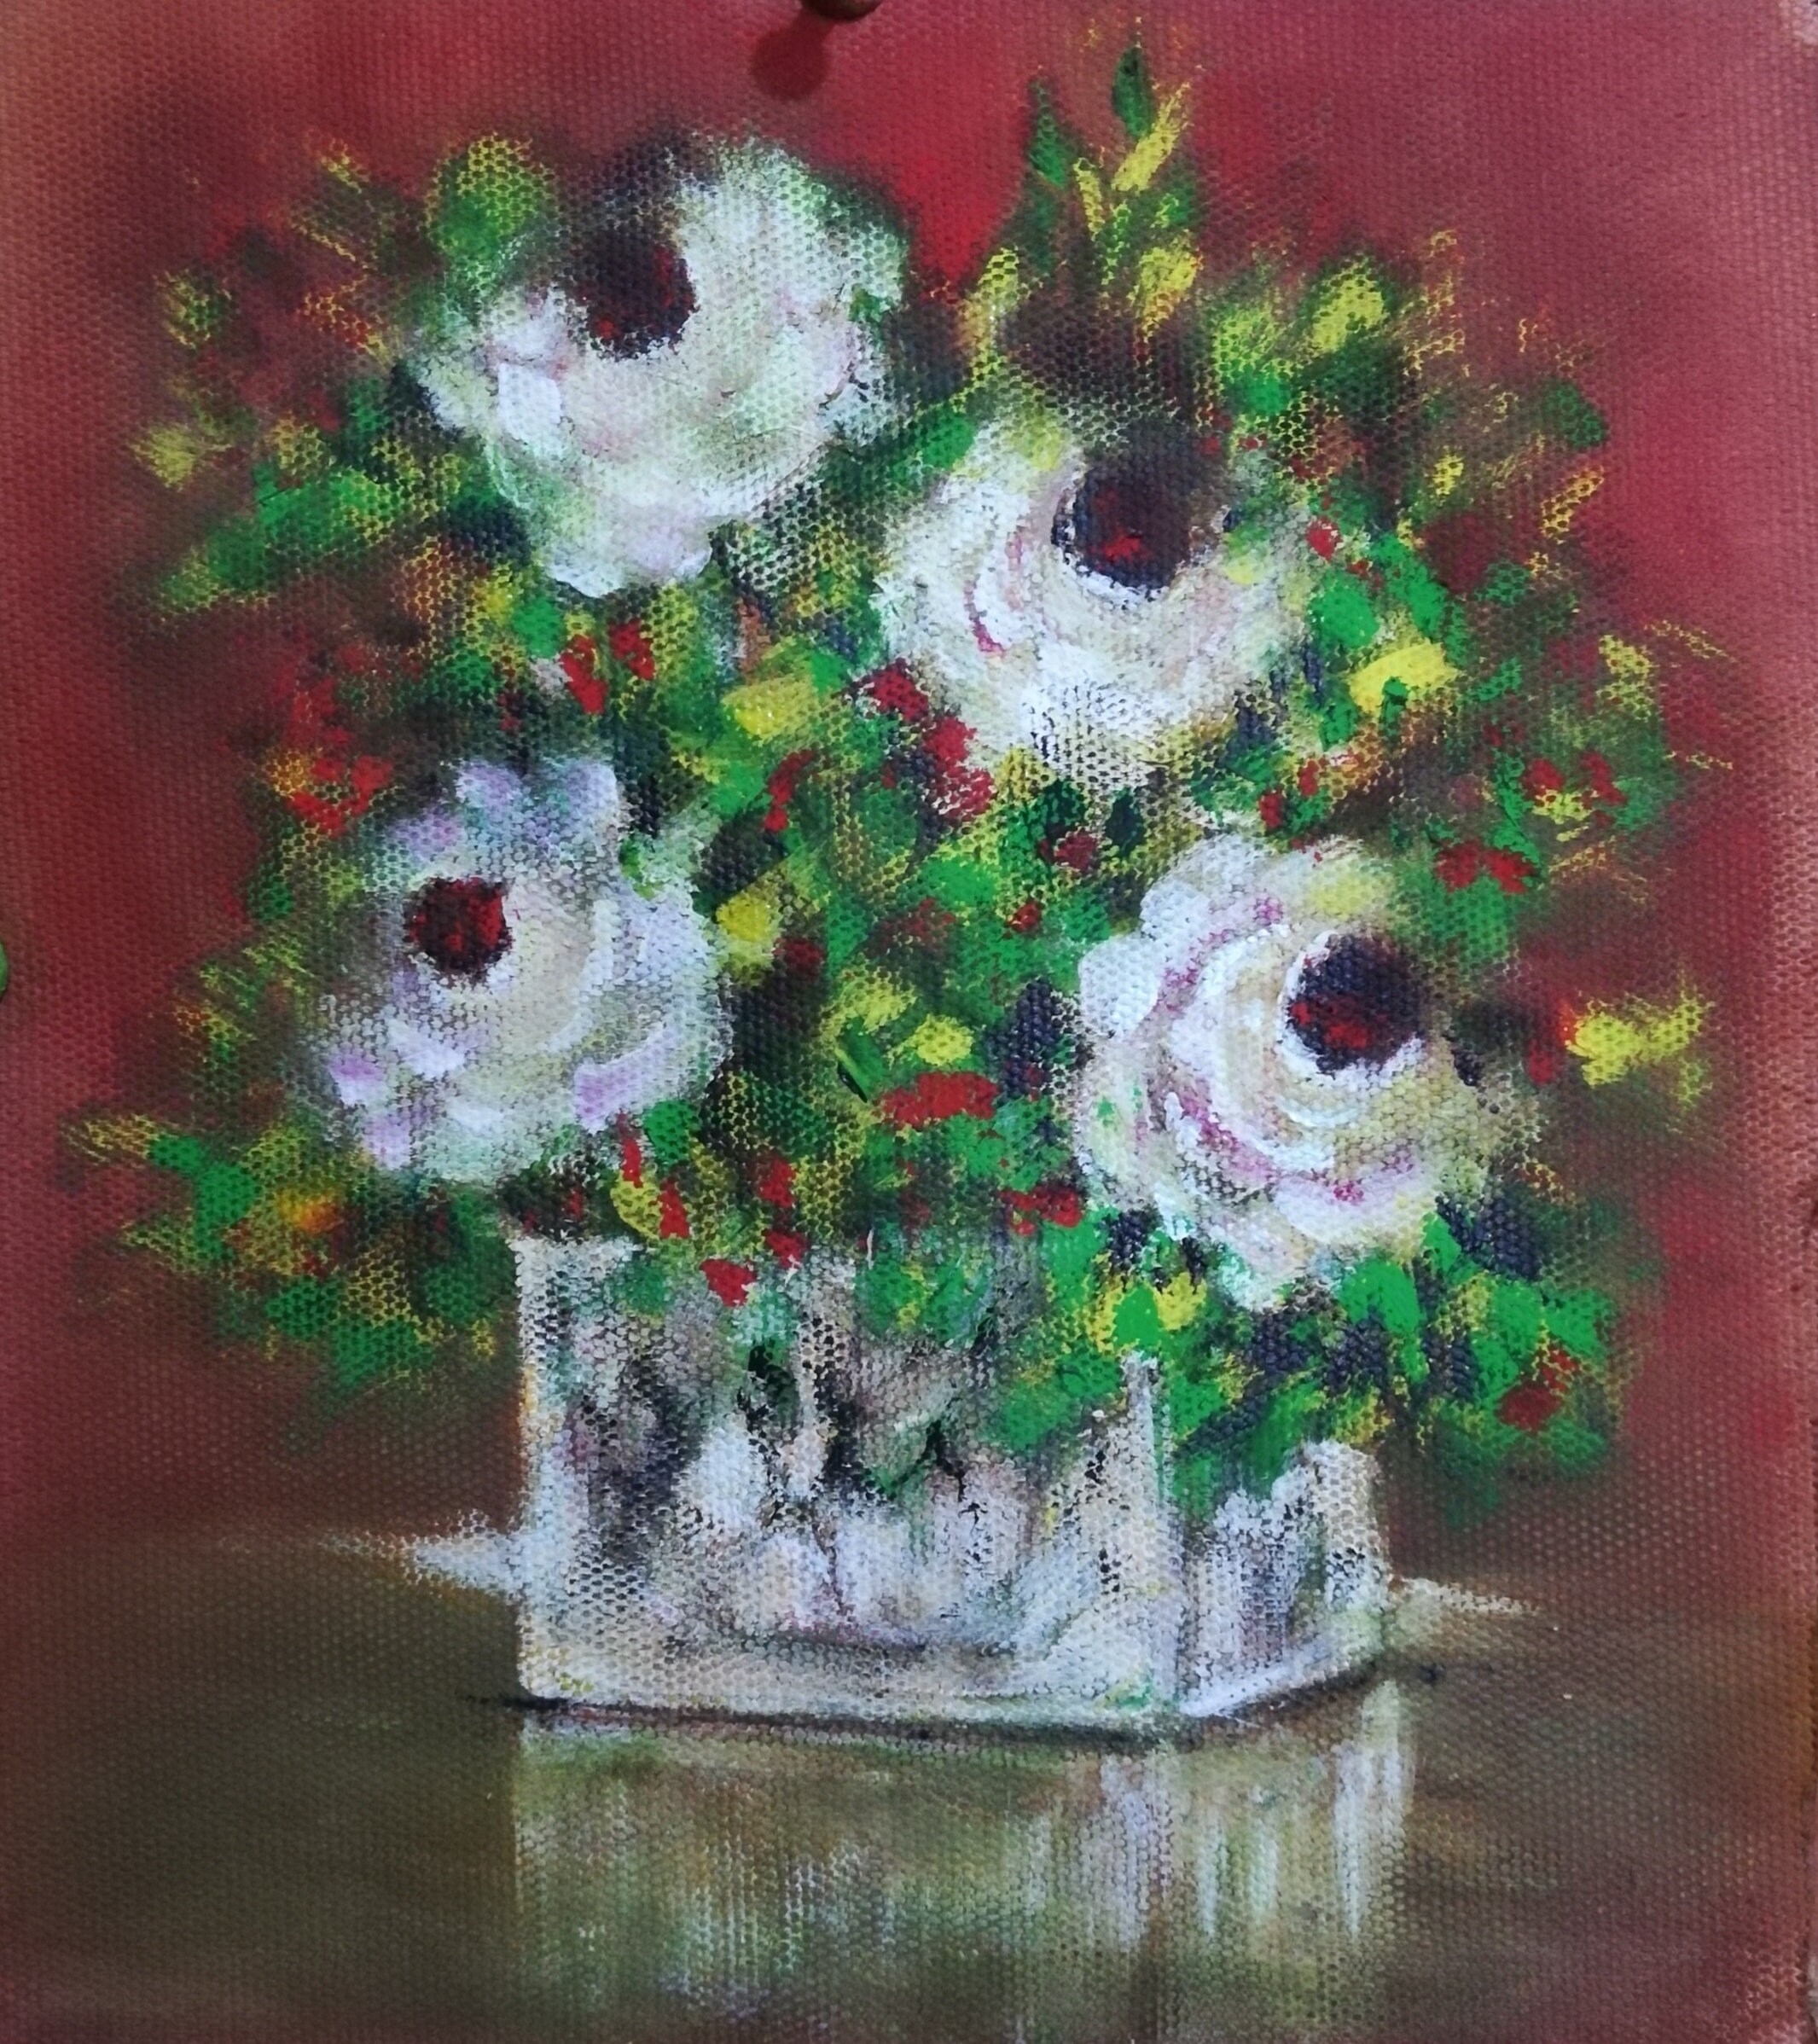 flowers in vase, original painting, on canvas, acrylic, watercolor,thumbnail